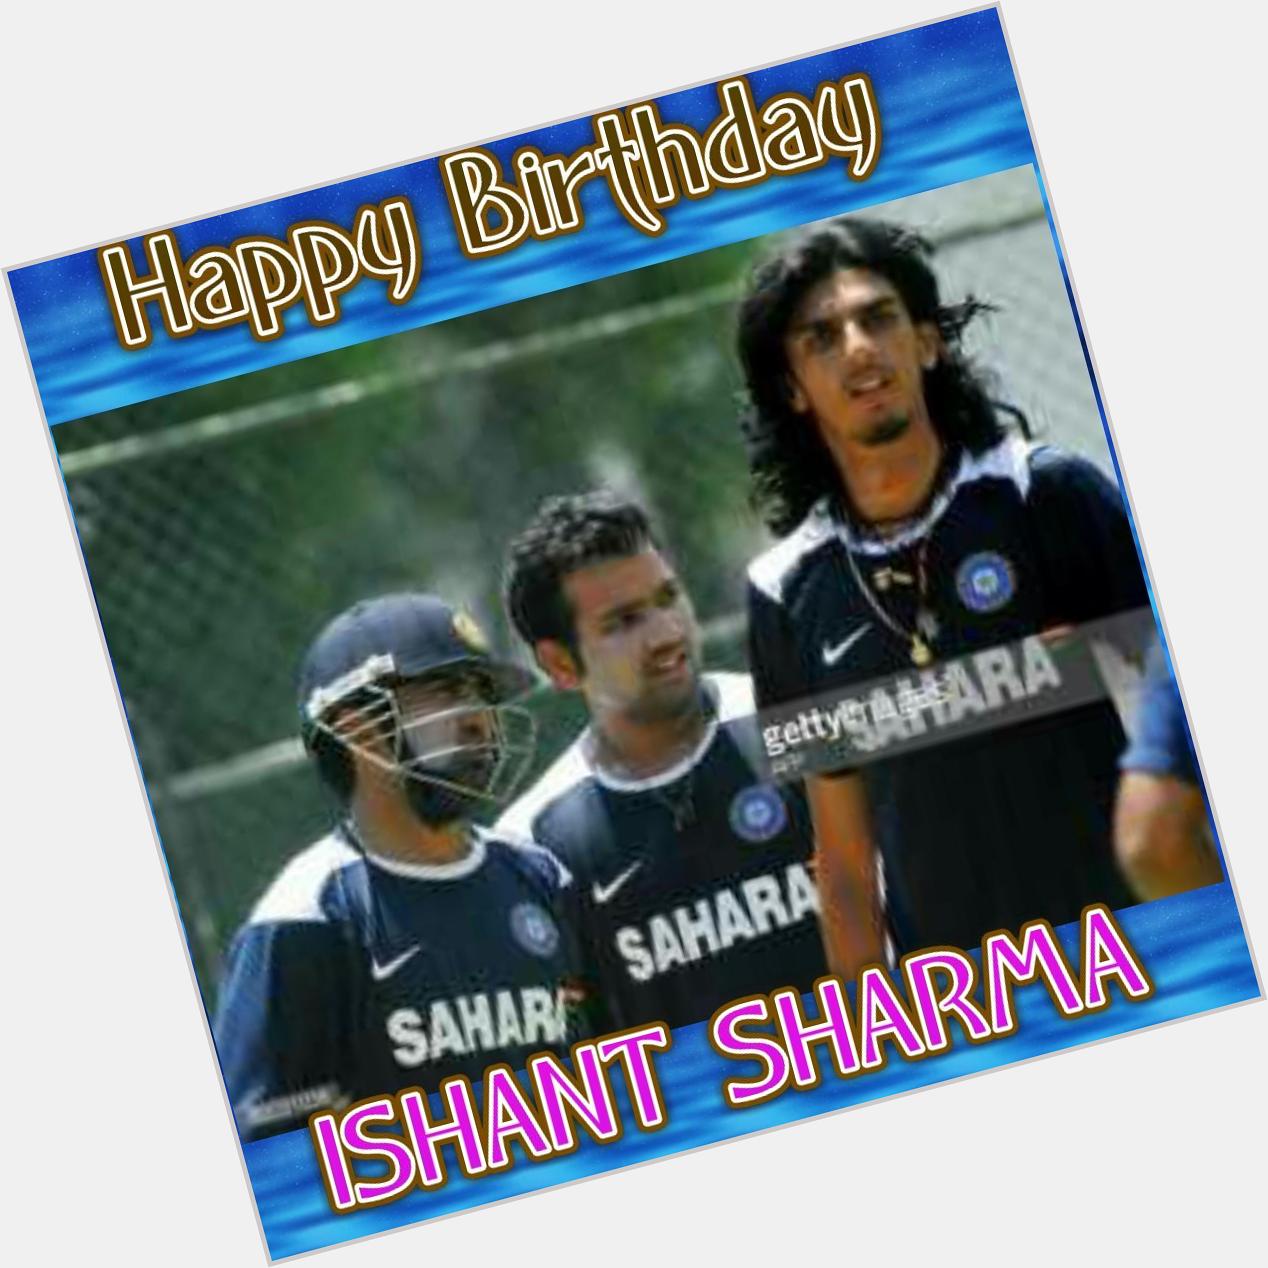 Wish you happy birthday to Indian speed star Ishant Sharma.
God bless you. have a great one. 